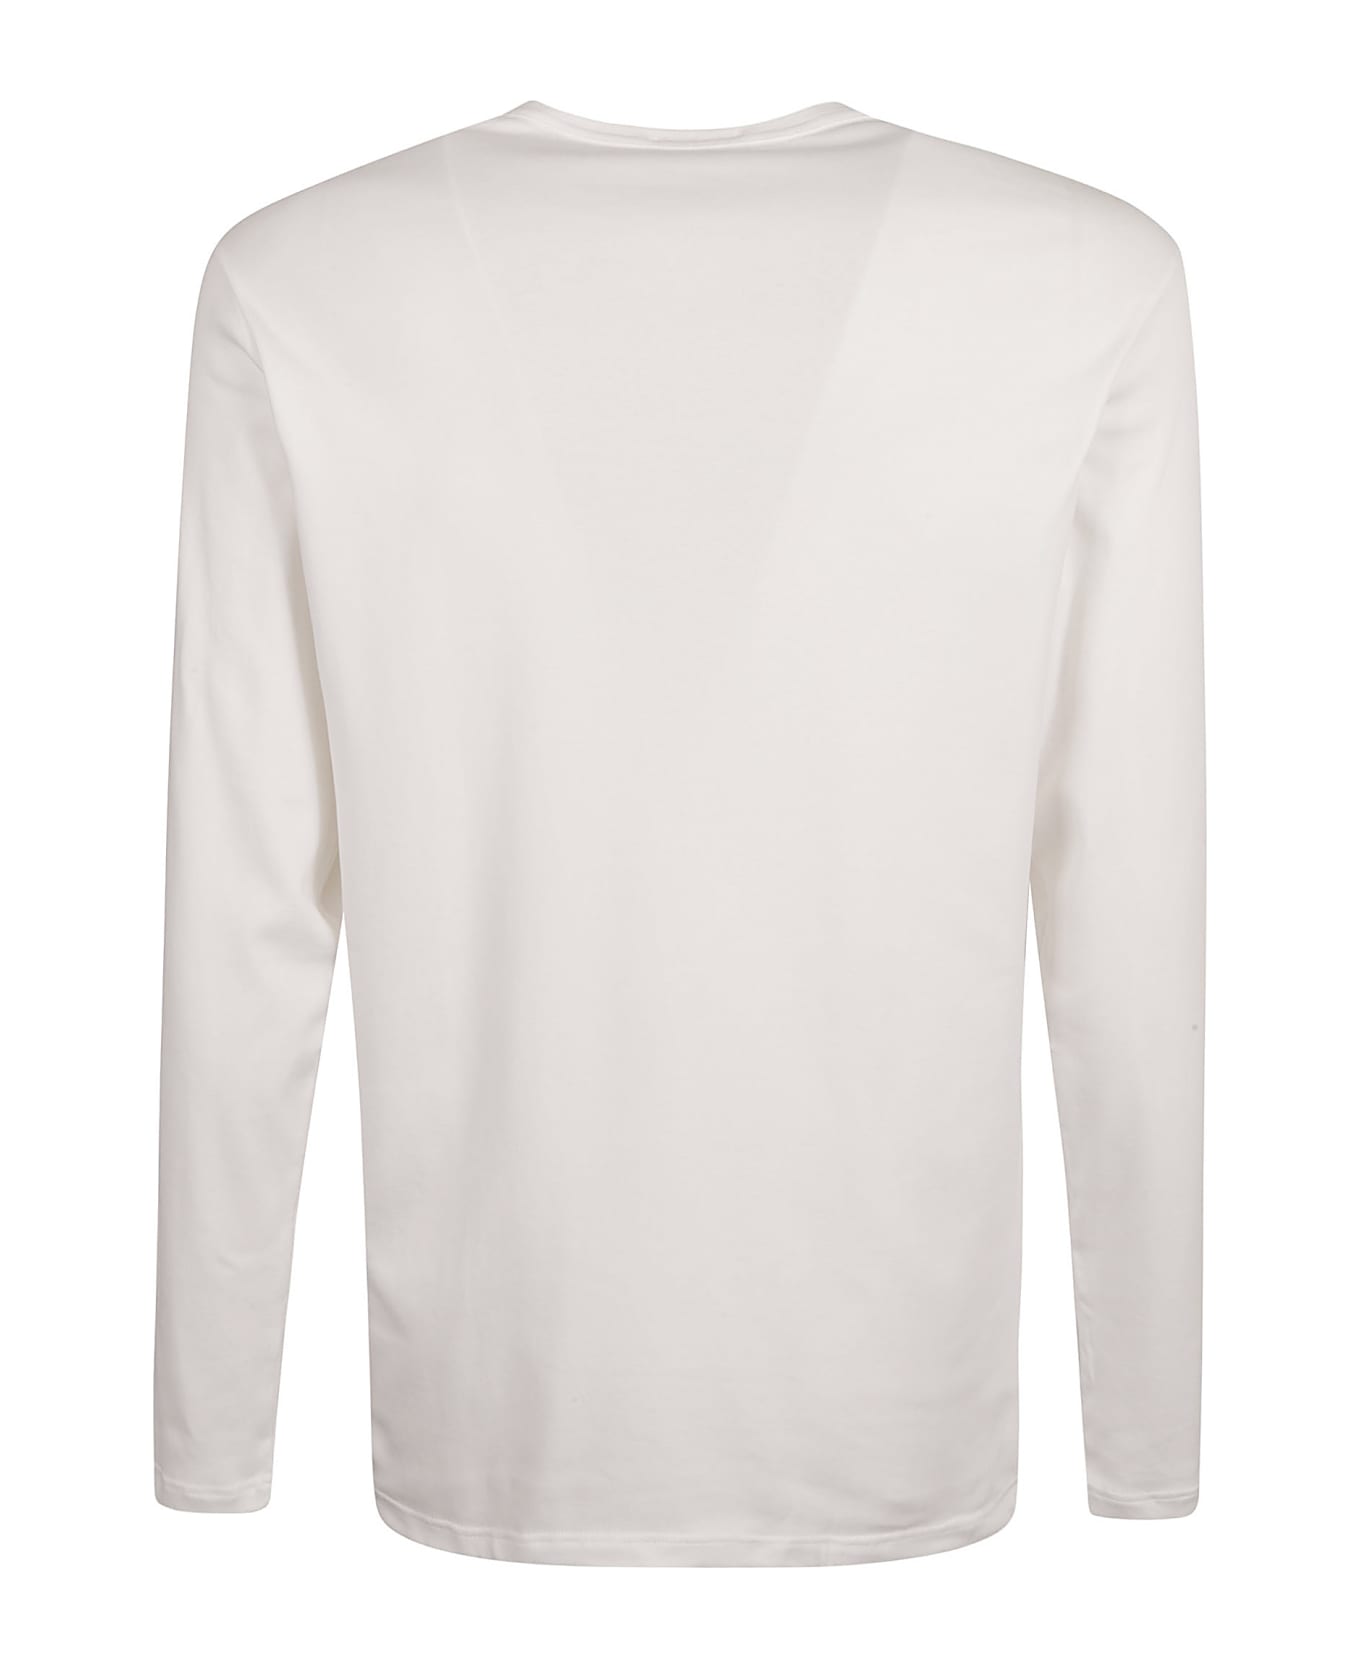 Tom Ford Henley Top - White